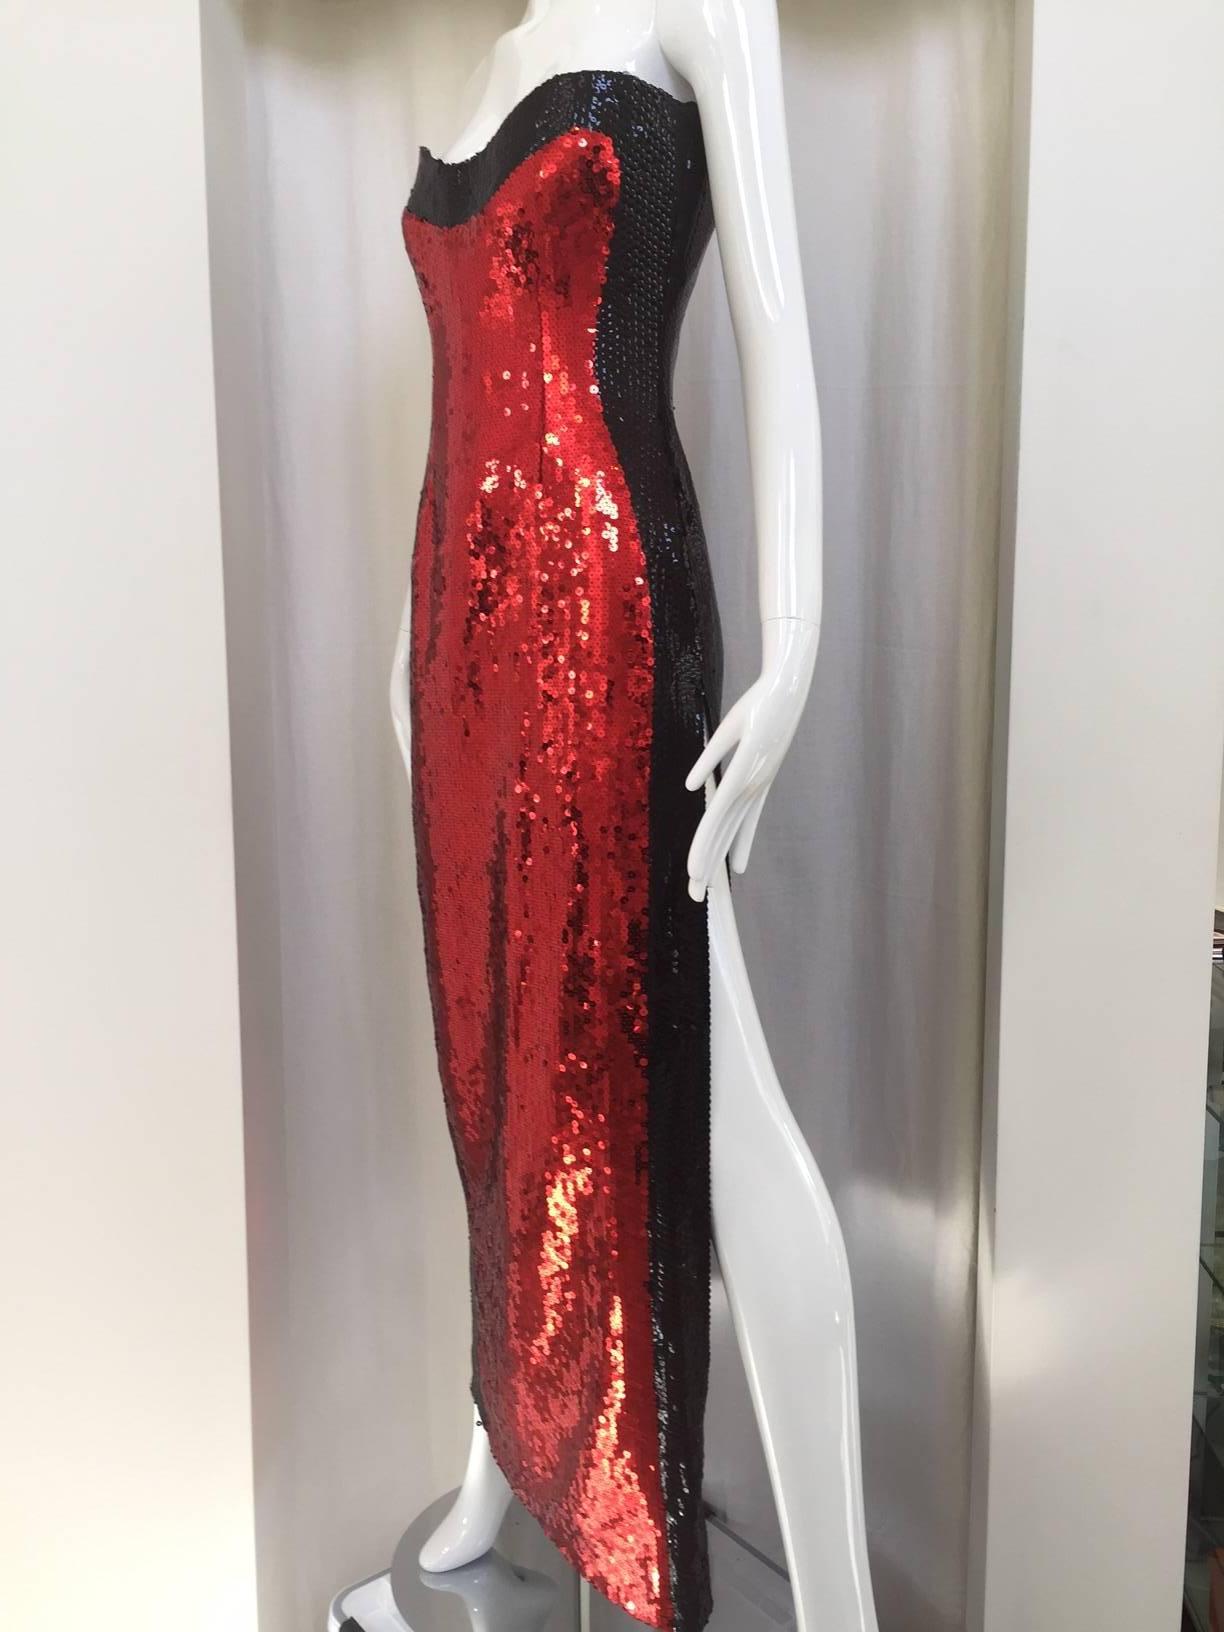 Fun Bill blass red and black sequin strapless gown.
Gown has high slit on the side 33